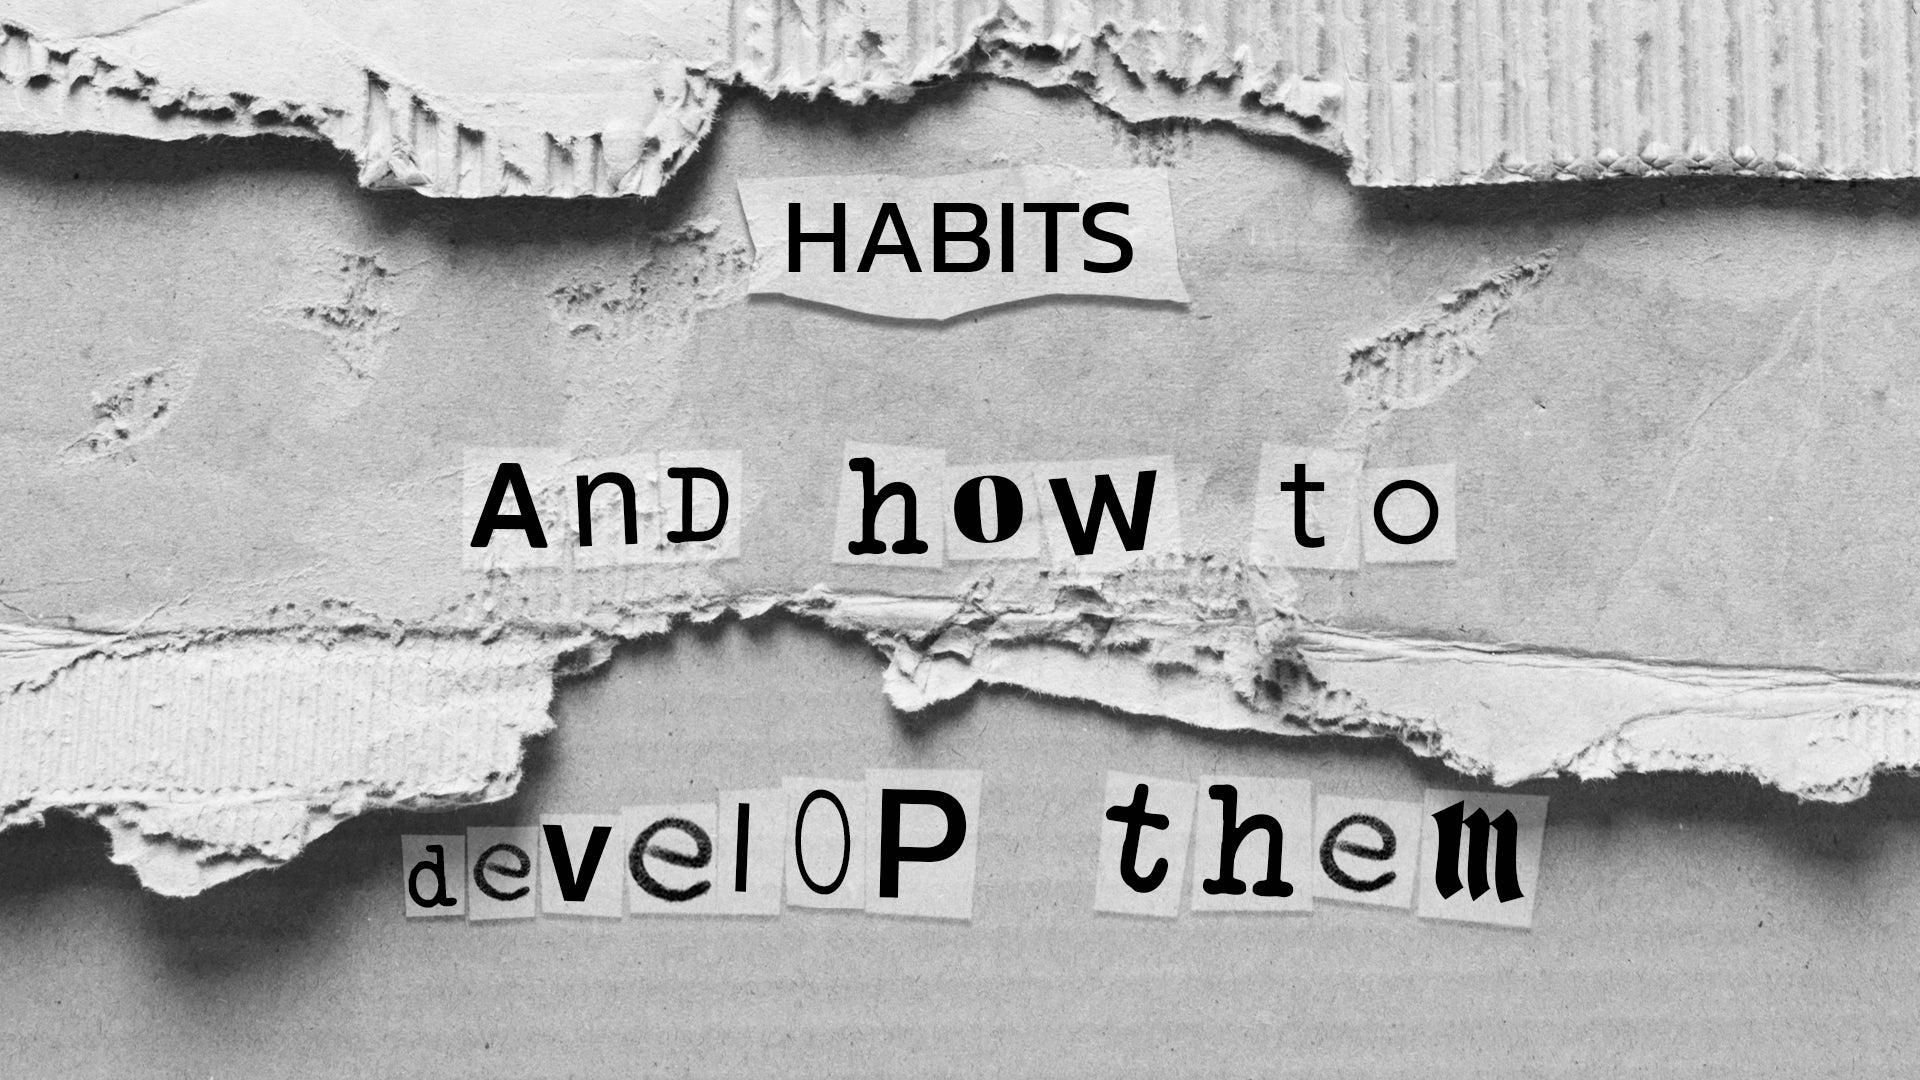 HABITS AND HOW TO DEVELOP THEM